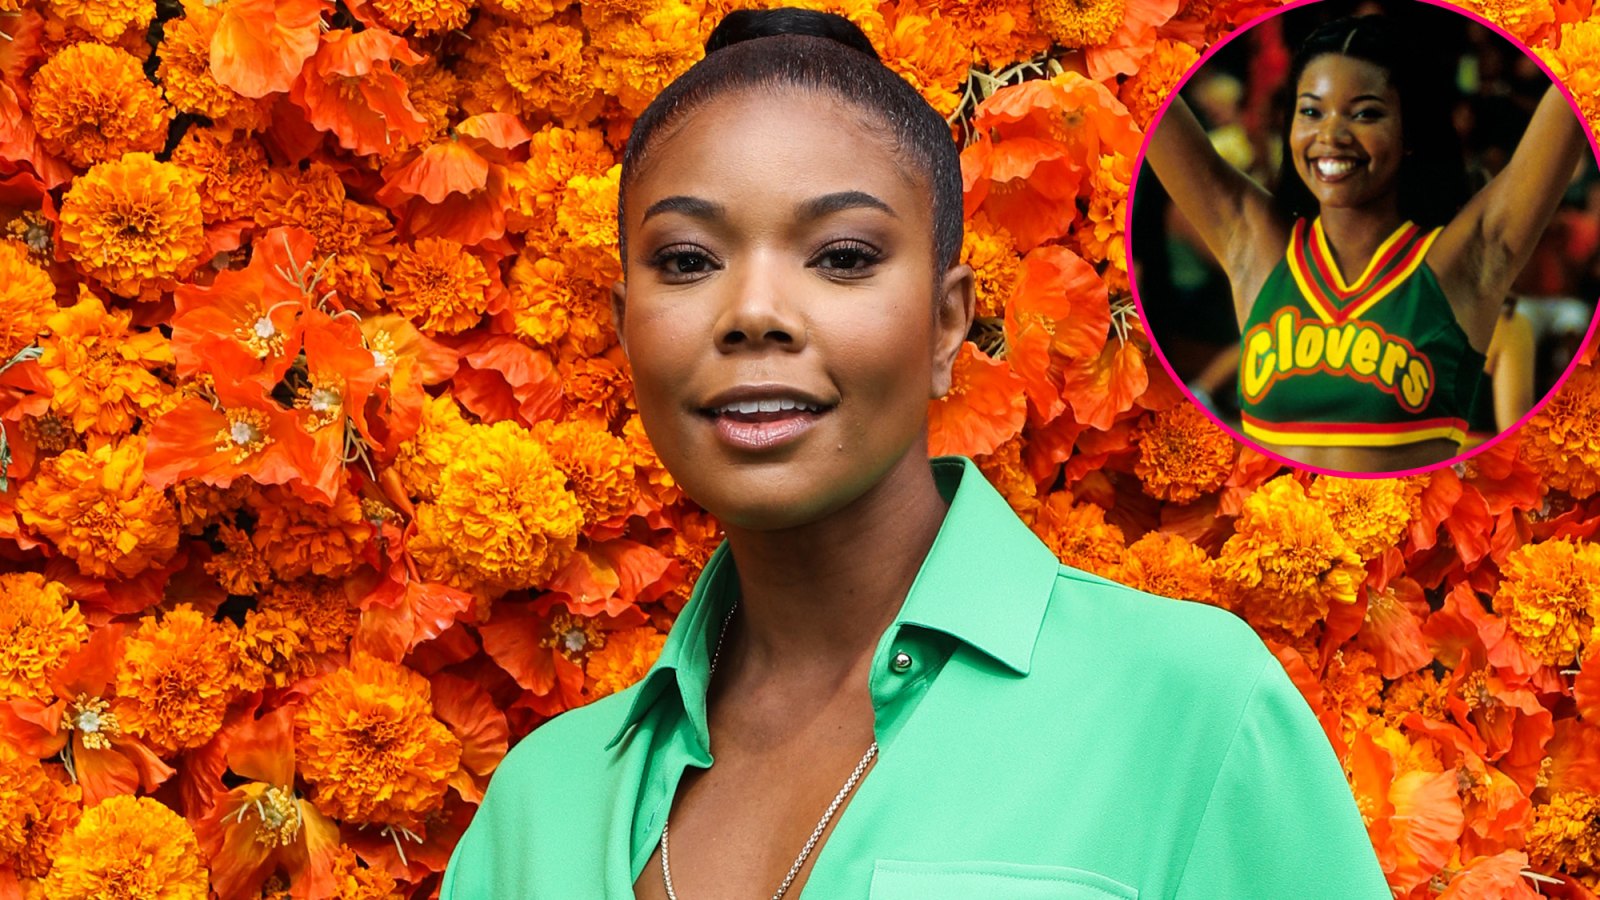 Gabrielle Union Filmed Extra ‘Bring It On’ Scenes After Movie Wrapped Because Fans ‘Wanted More Clovers’